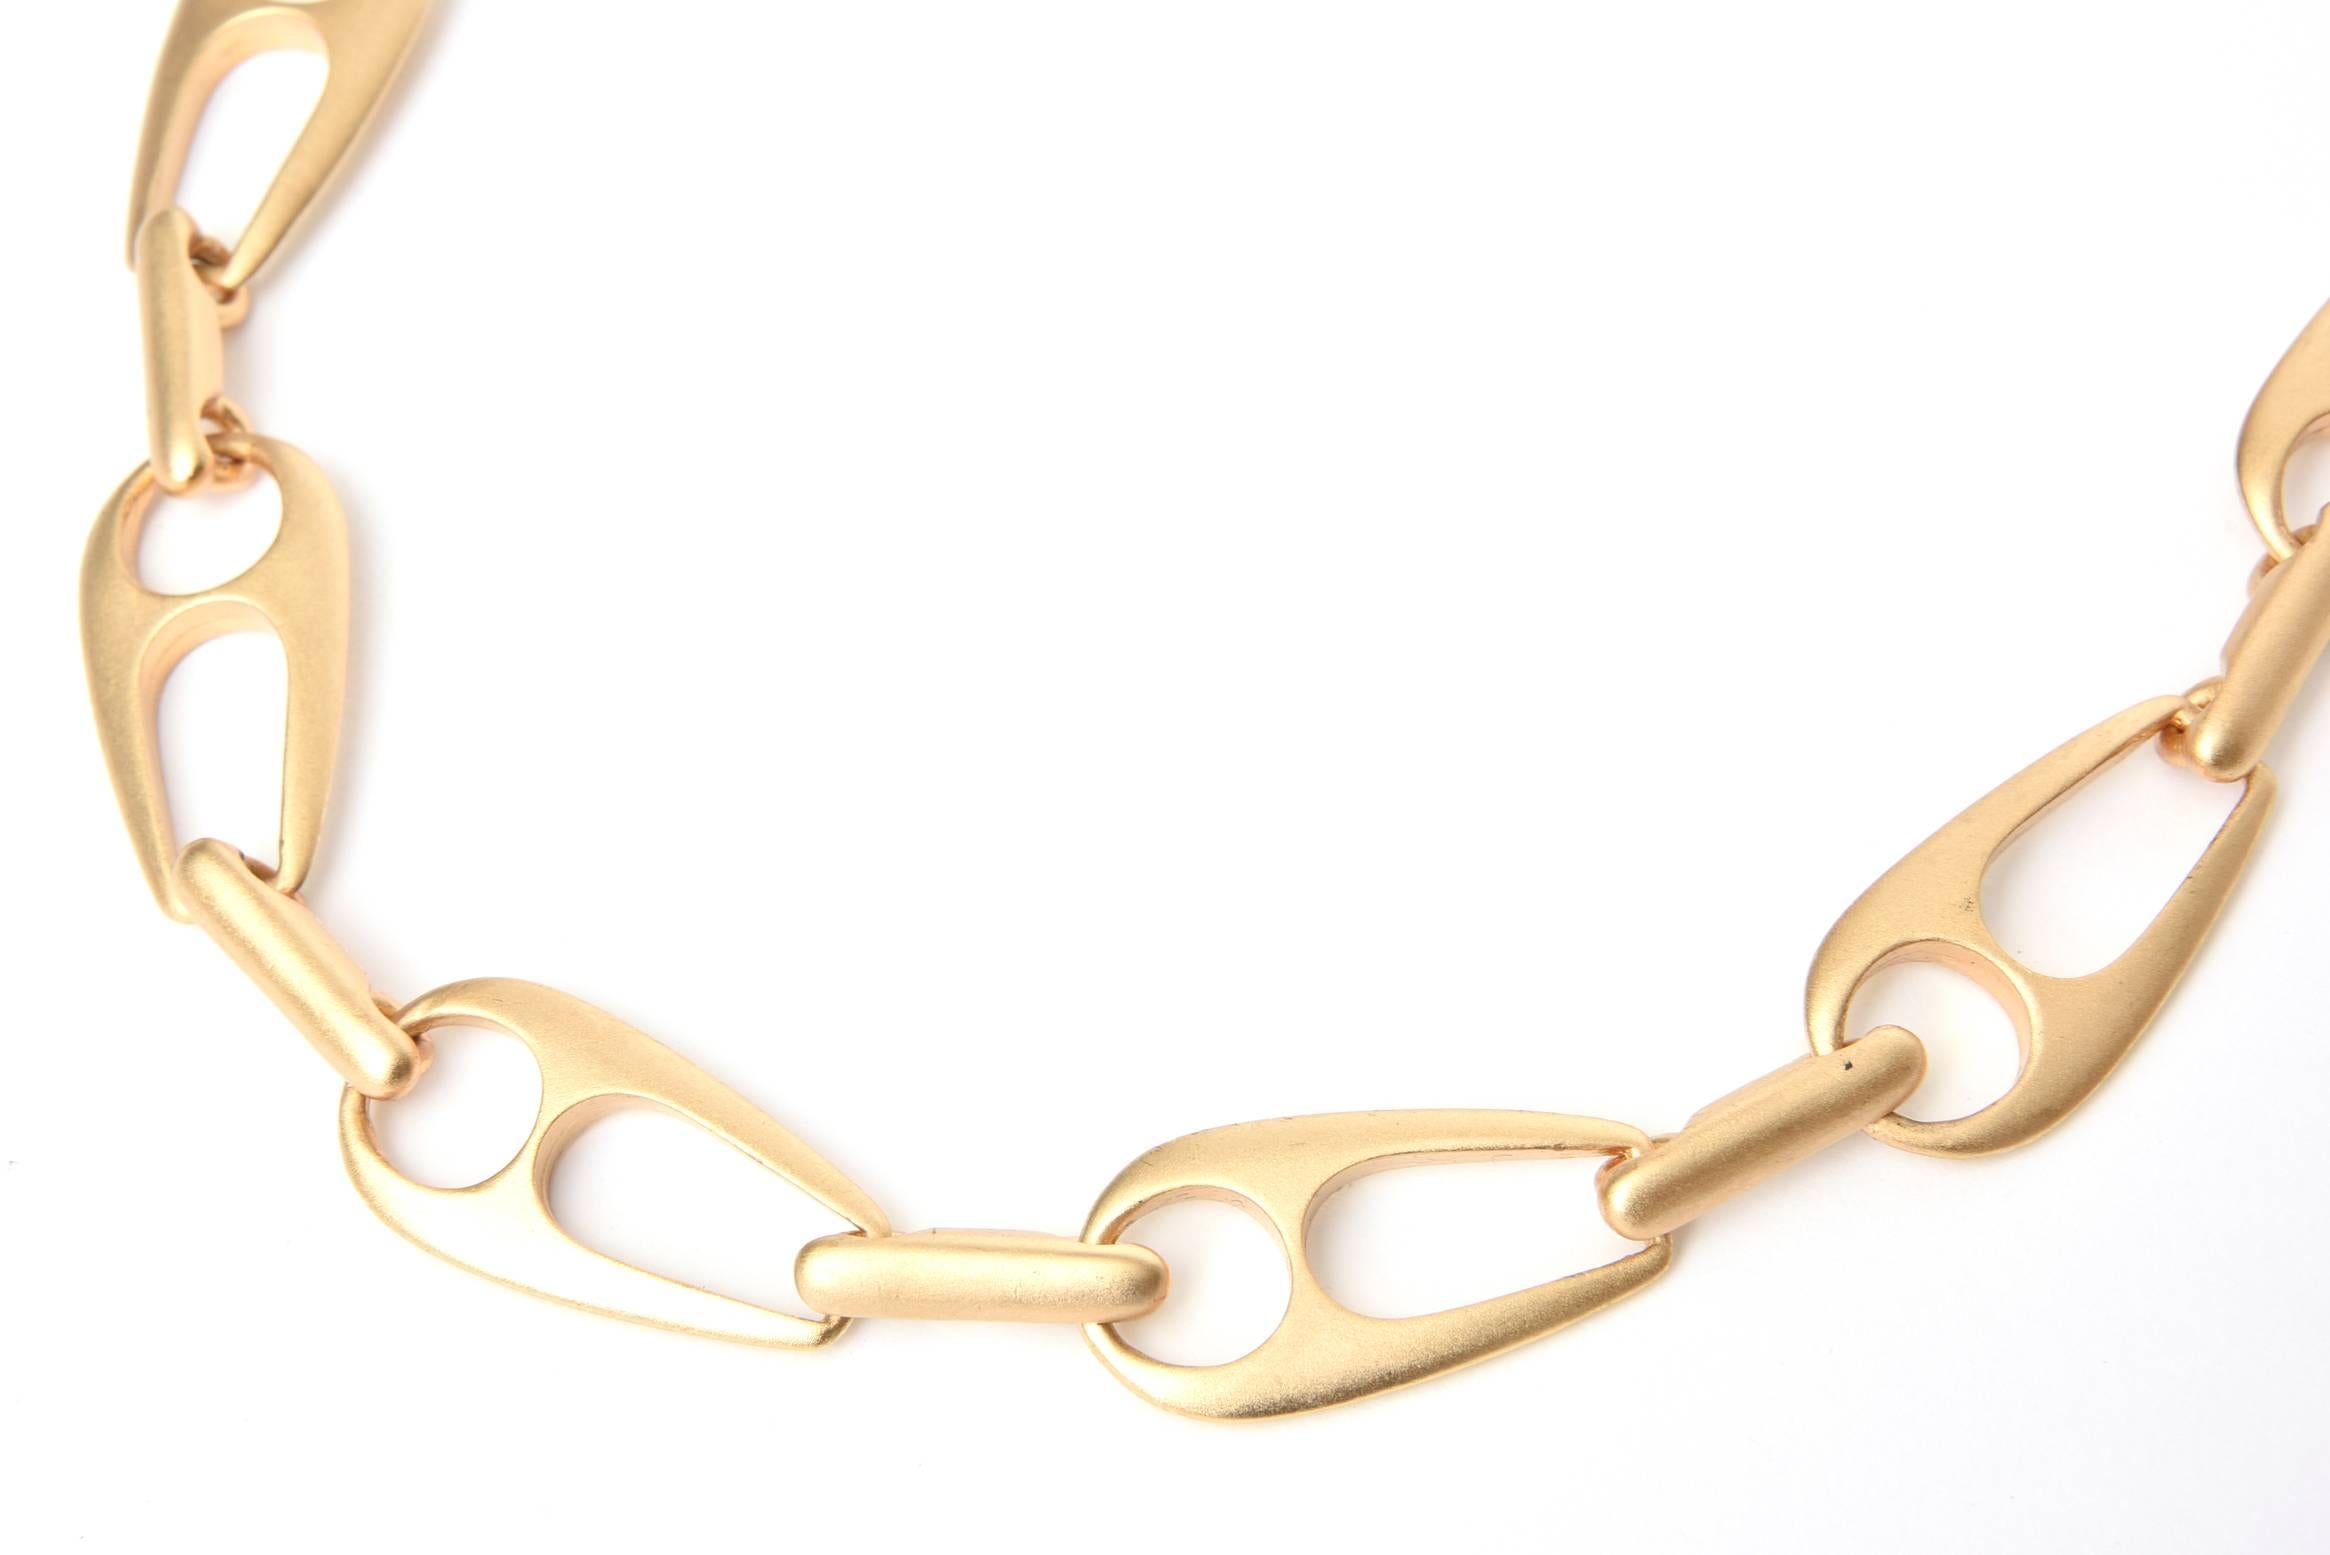 This wonderful satin gold plated chain necklace is Gucci Inspired and has been attributed to Alexis Kirk, although it is unsigned. It is sculptural and modern. It has good weight to it. Each link is one inch wide, by 1.85 inches long. It is 14